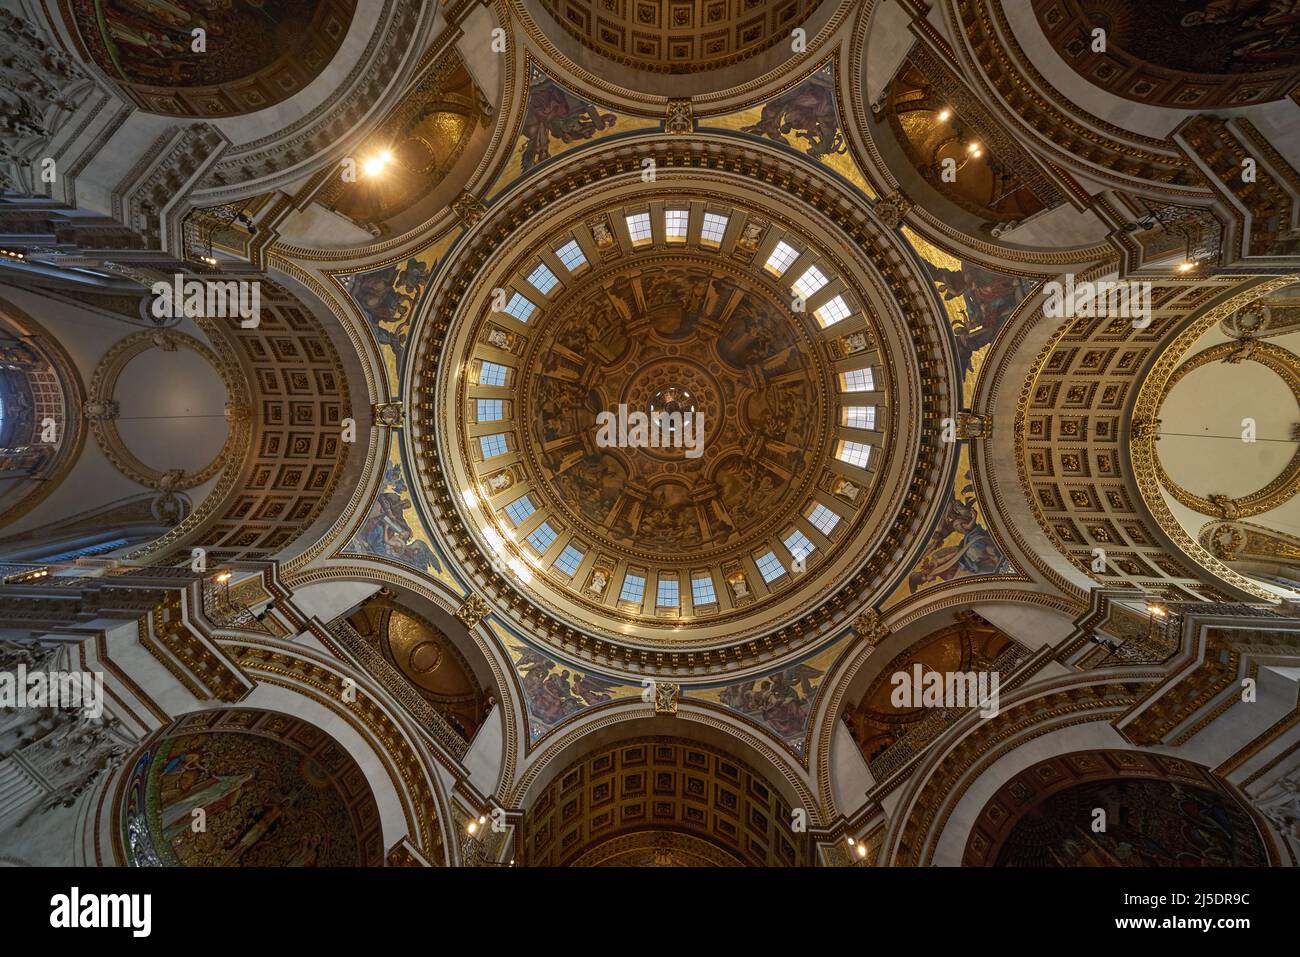 interior of dome of st pauls cathedral Stock Photo